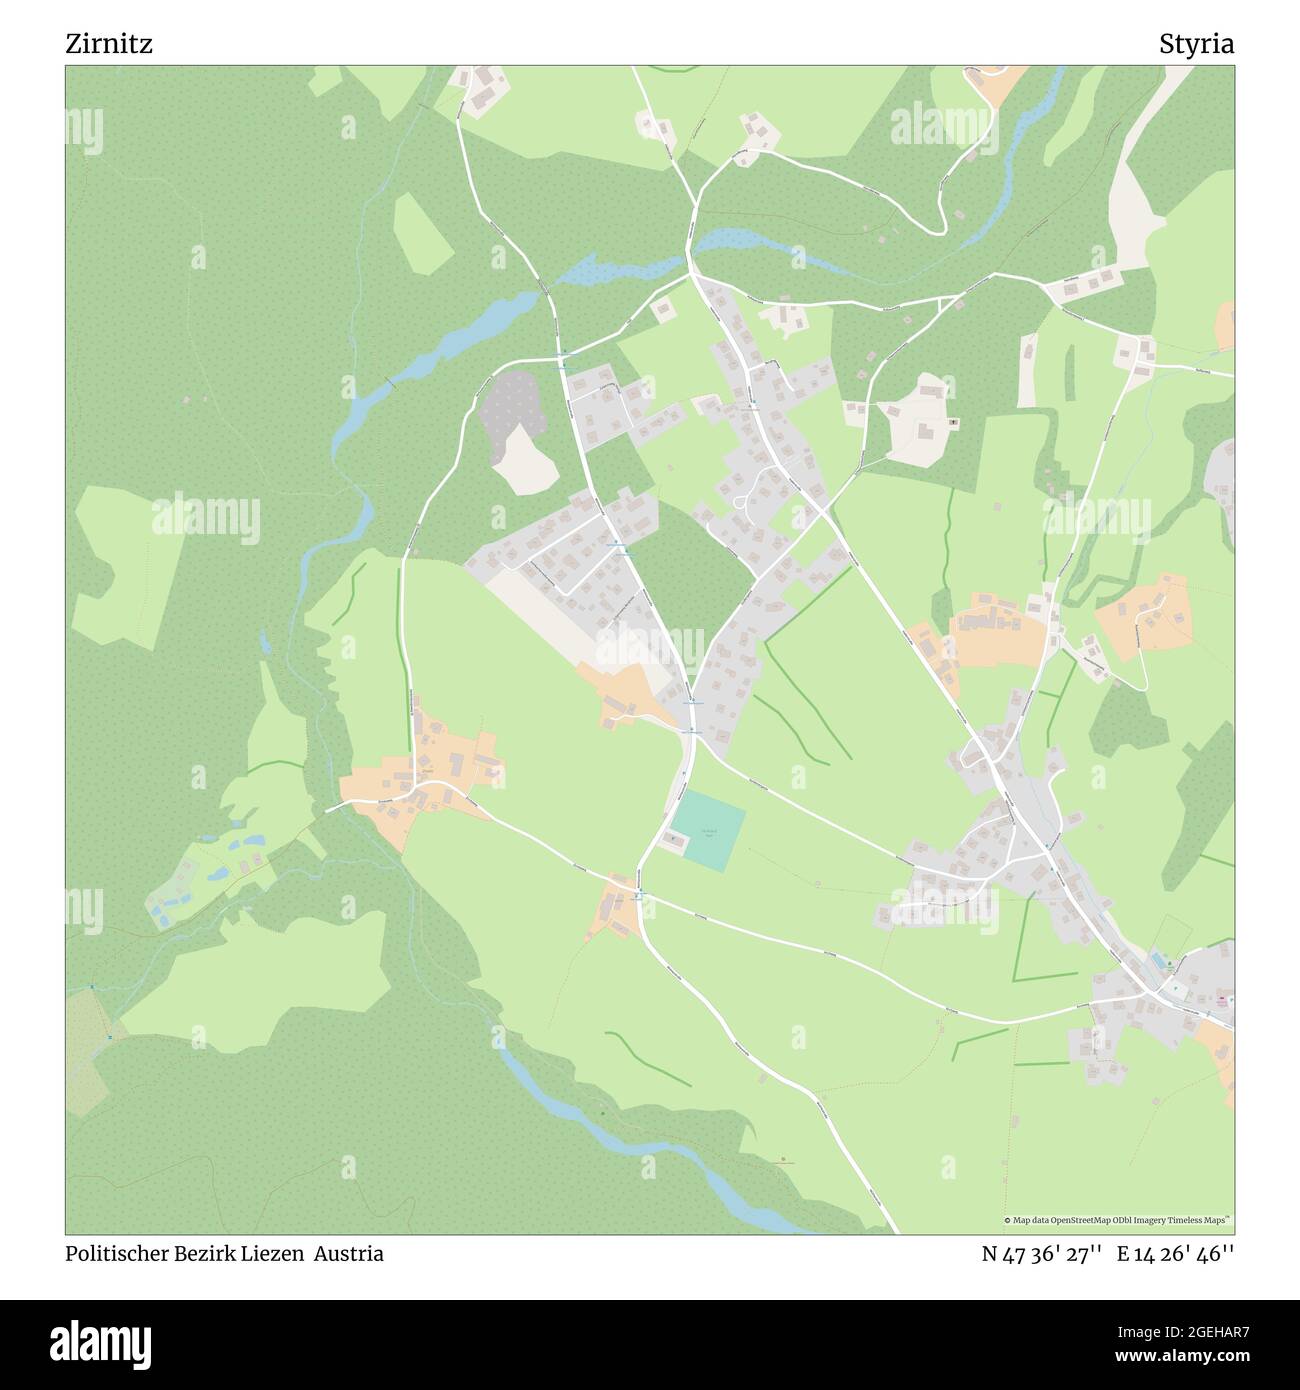 Zirnitz, Politischer Bezirk Liezen, Austria, Styria, N 47 36' 27'', E 14 26' 46'', map, Timeless Map published in 2021. Travelers, explorers and adventurers like Florence Nightingale, David Livingstone, Ernest Shackleton, Lewis and Clark and Sherlock Holmes relied on maps to plan travels to the world's most remote corners, Timeless Maps is mapping most locations on the globe, showing the achievement of great dreams Stock Photo